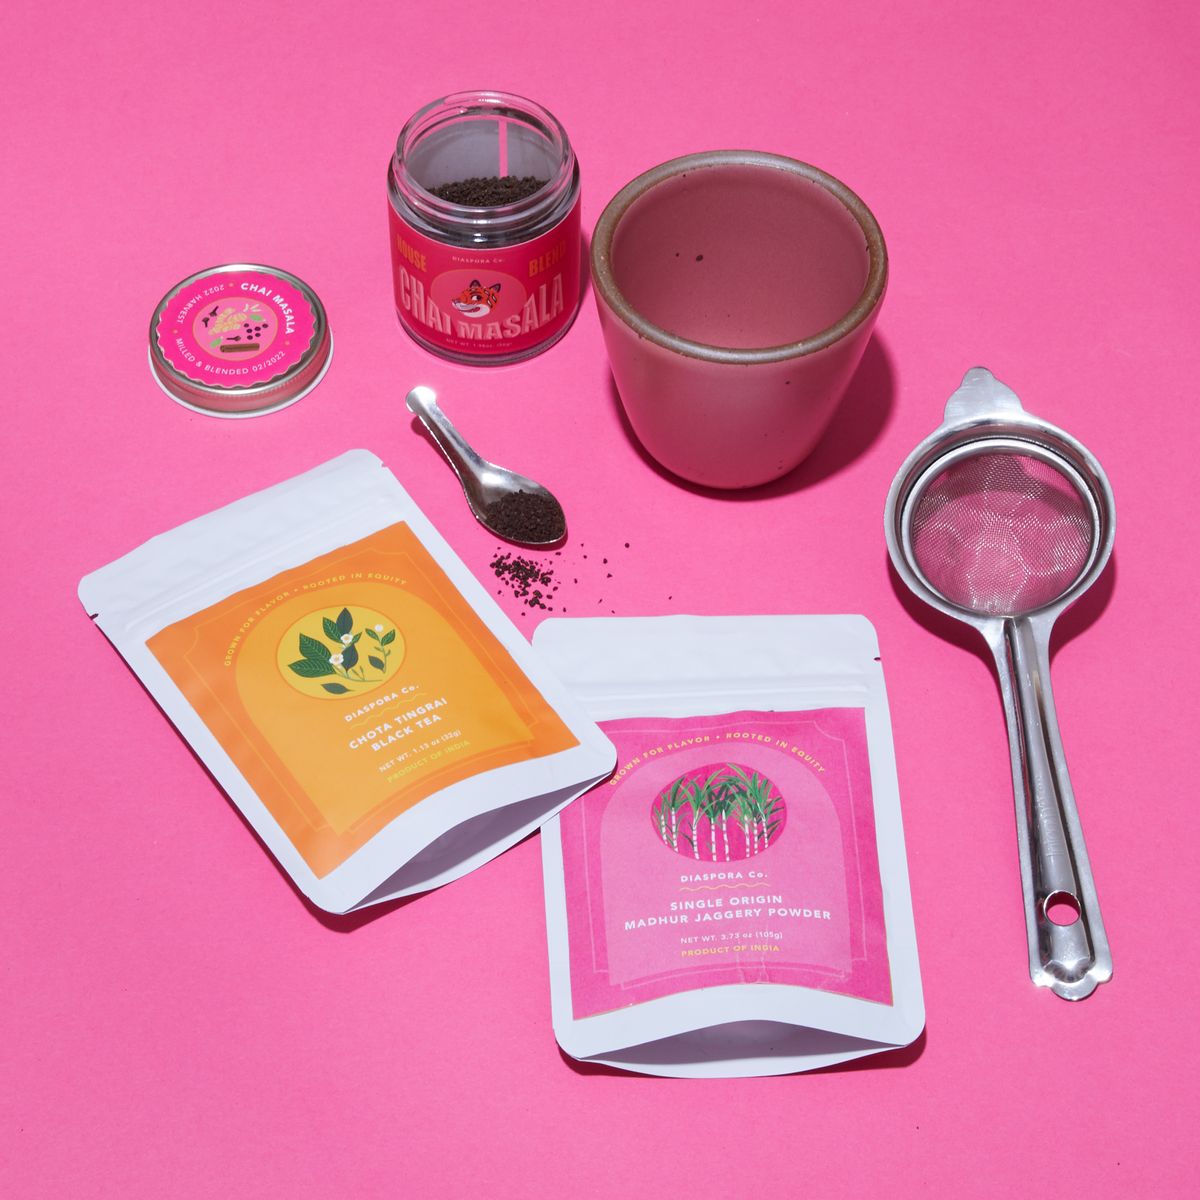 Two Chai Kuhlads – handleless mugs – in Rococo, a hot pink seasonal glaze made by East Fork Pottery. Photographed with two packages of chai mix. Photographed with a stainless tea strainer, a small glass container with a hot pink label holding Diaspora Co.'s house chai blend and two white plastic bags of more tea from Diaspora. Each have a bright label, in orange and pink.